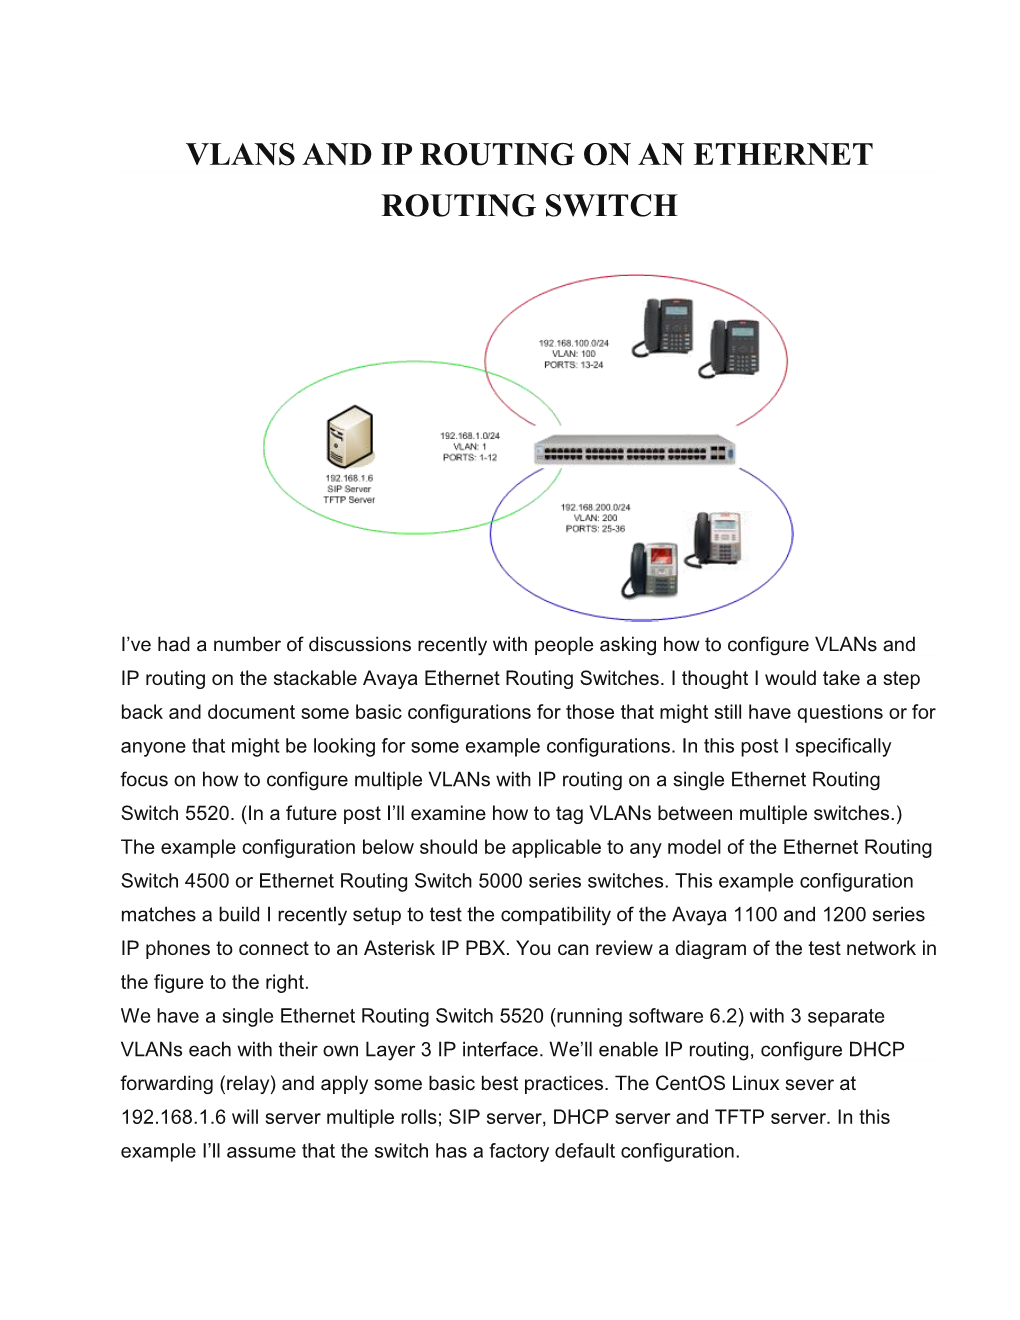 Vlans and Ip Routing on an Ethernet Routing Switch